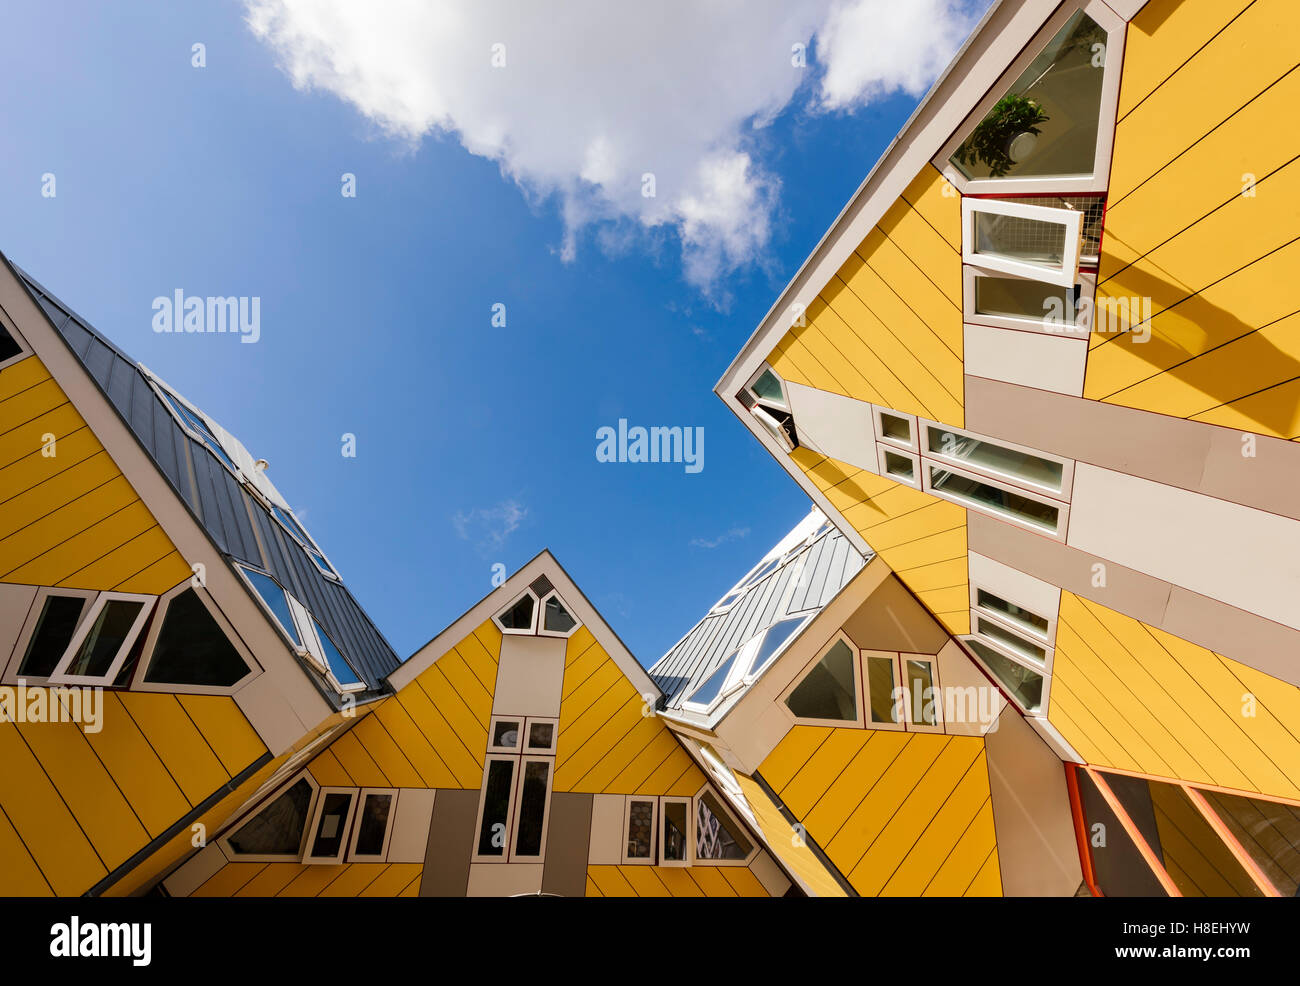 Blaakse Bos, Cube Houses, Oudehaven, Rotterdam, Netherlands, Europe Stock Photo